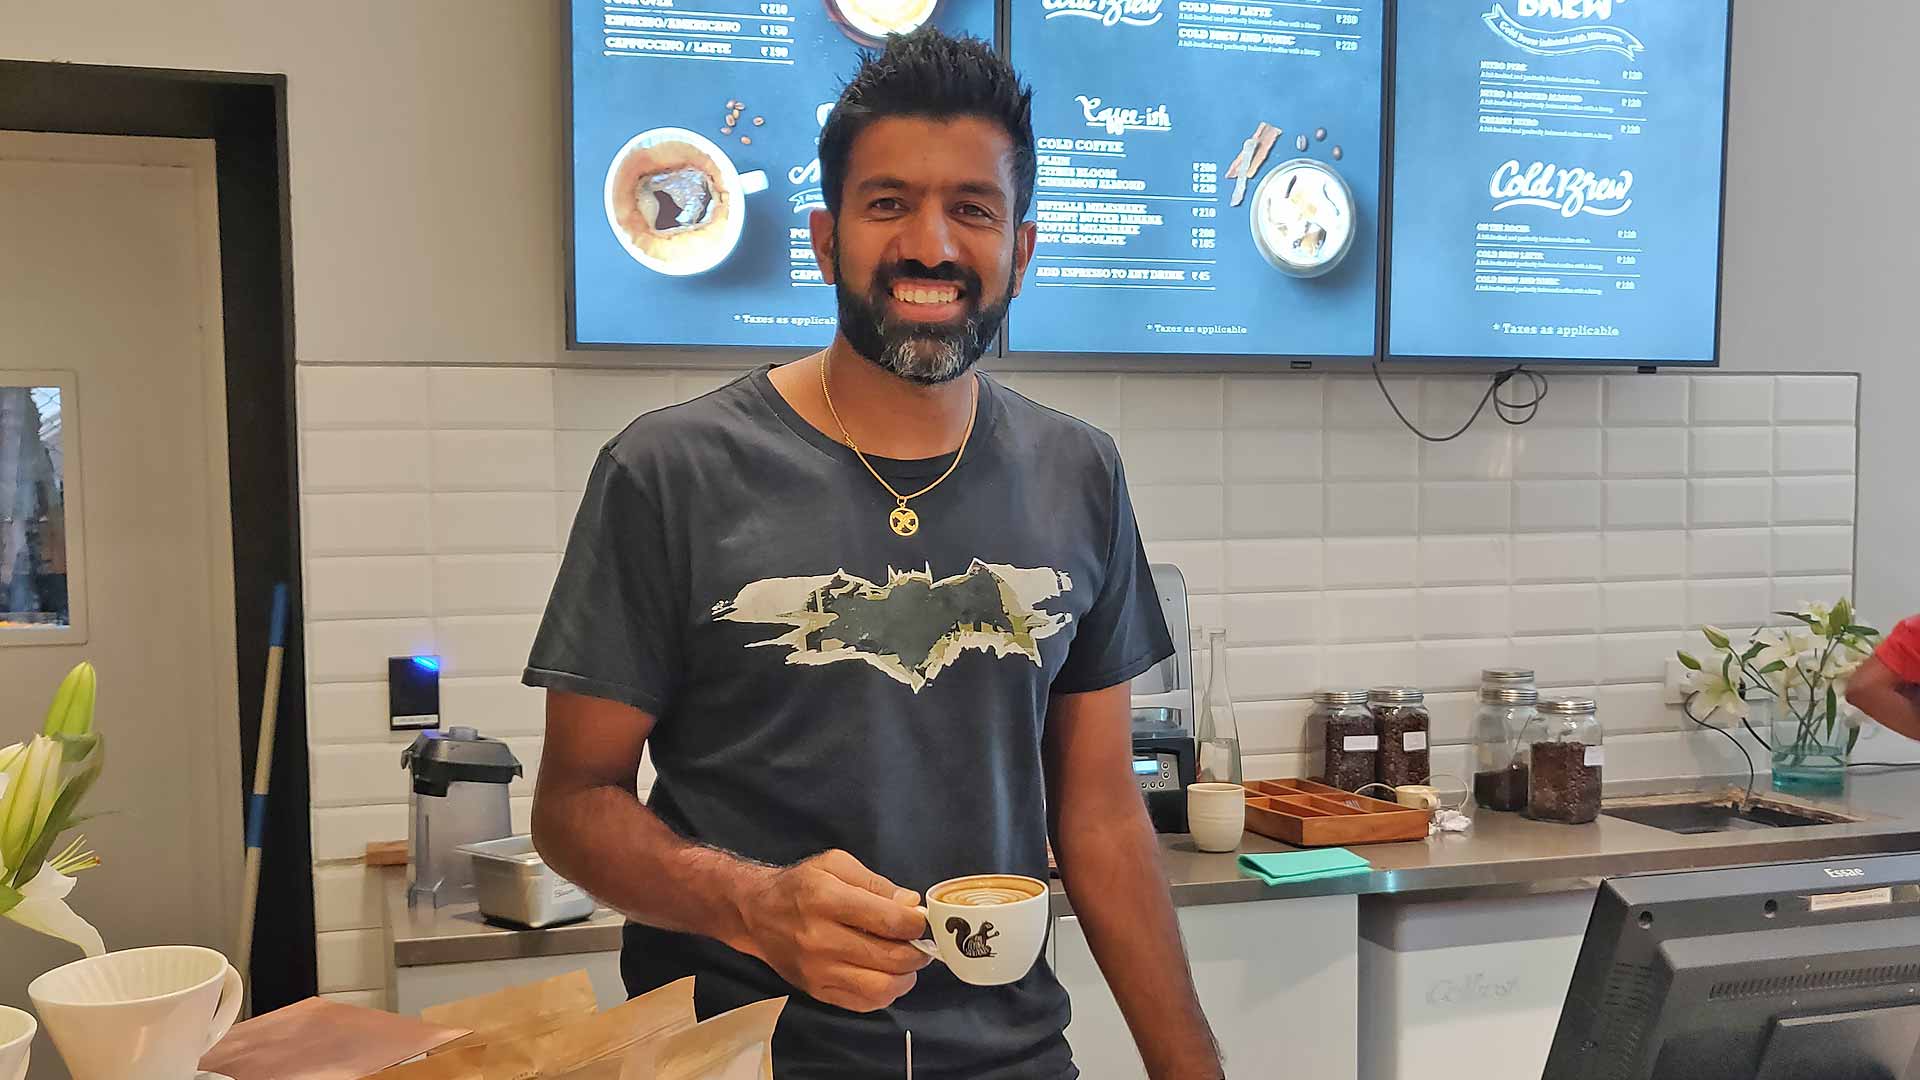 Bopanna credits Coorg Coffee for his roaring success at the age of 43 at The Indian Wells